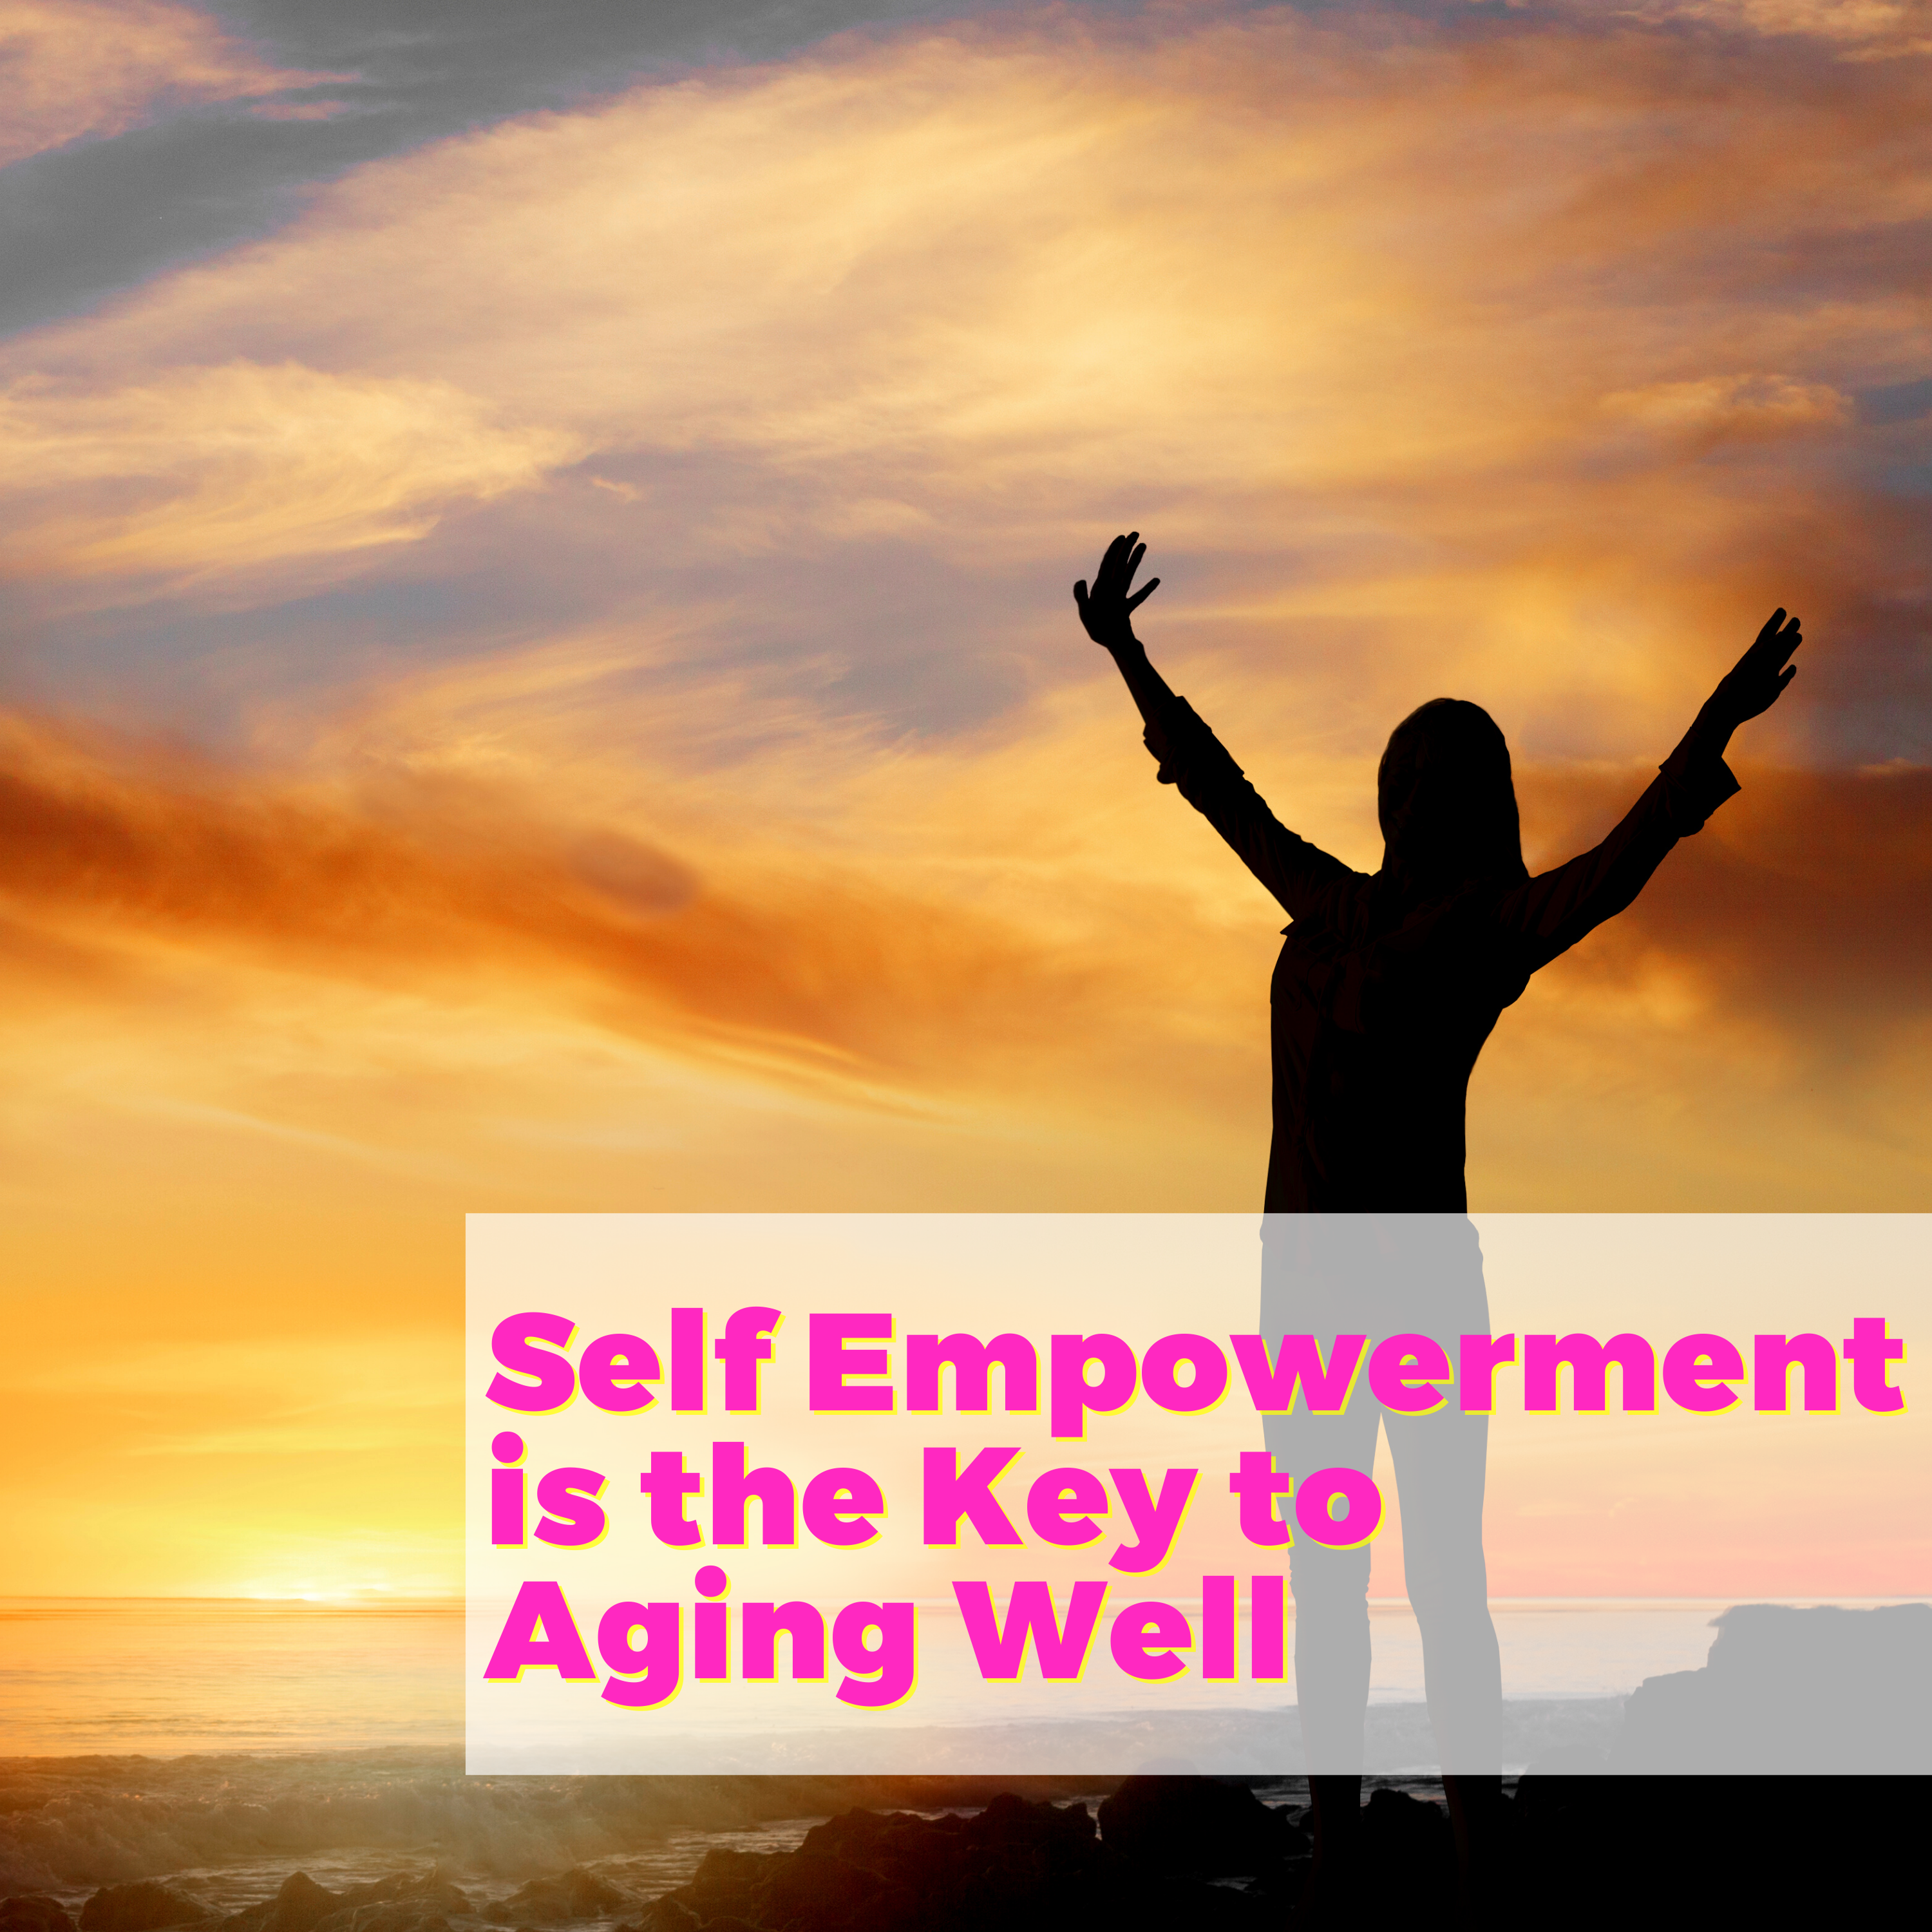 Self Empowerment is the Key to Aging Well with Cheryl Wood and Natalie Jill Midlife Conversations